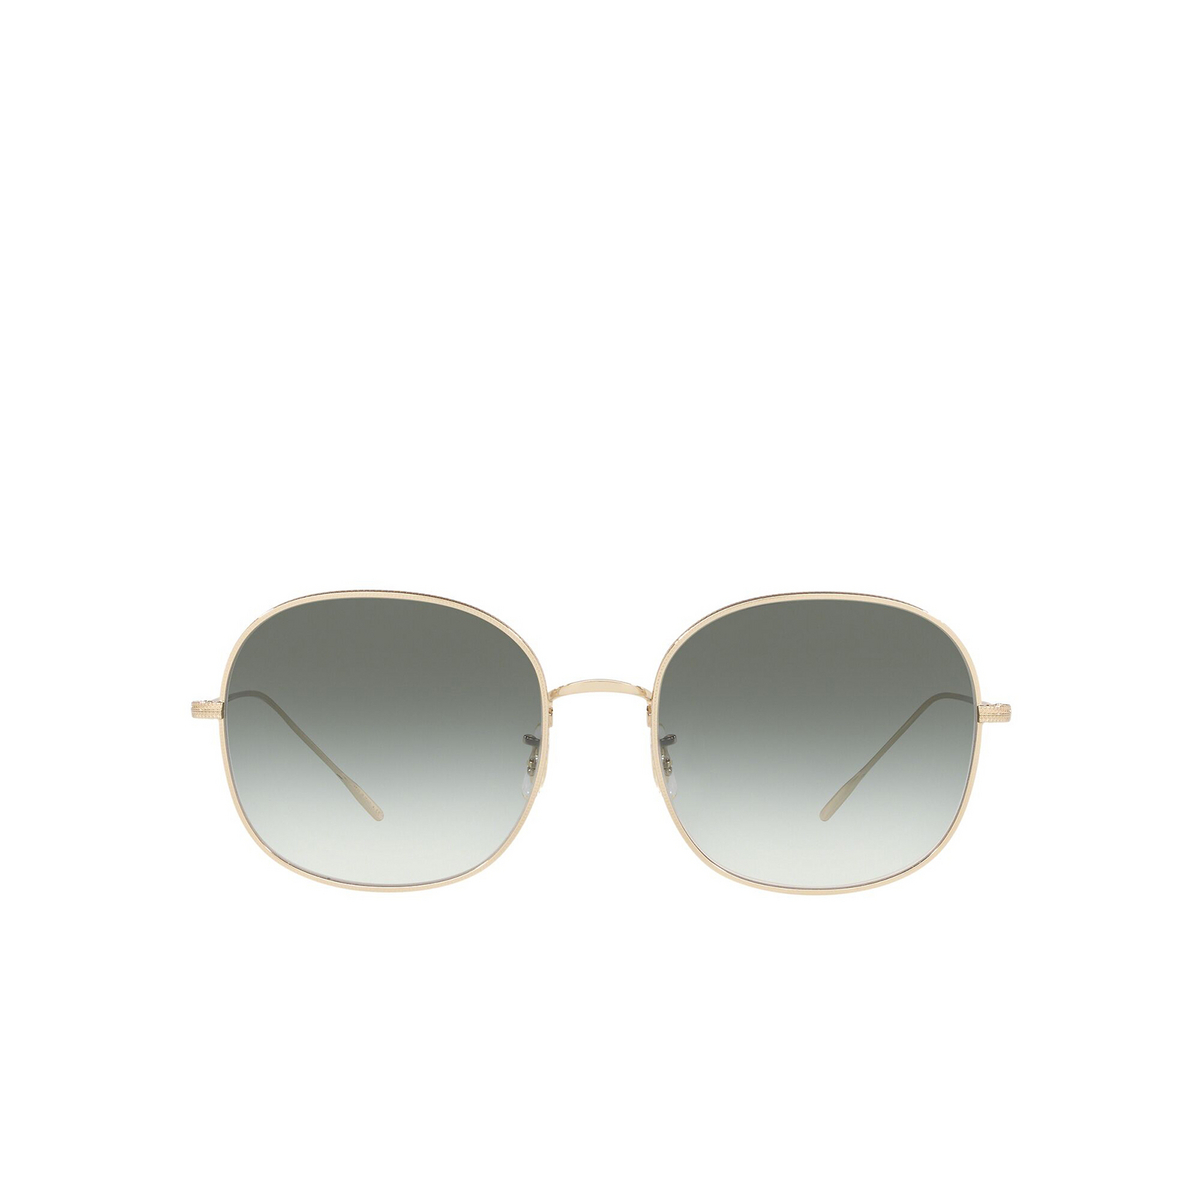 Oliver Peoples® Round Sunglasses: Mehrie OV1255S color Soft Gold 50352A - front view.